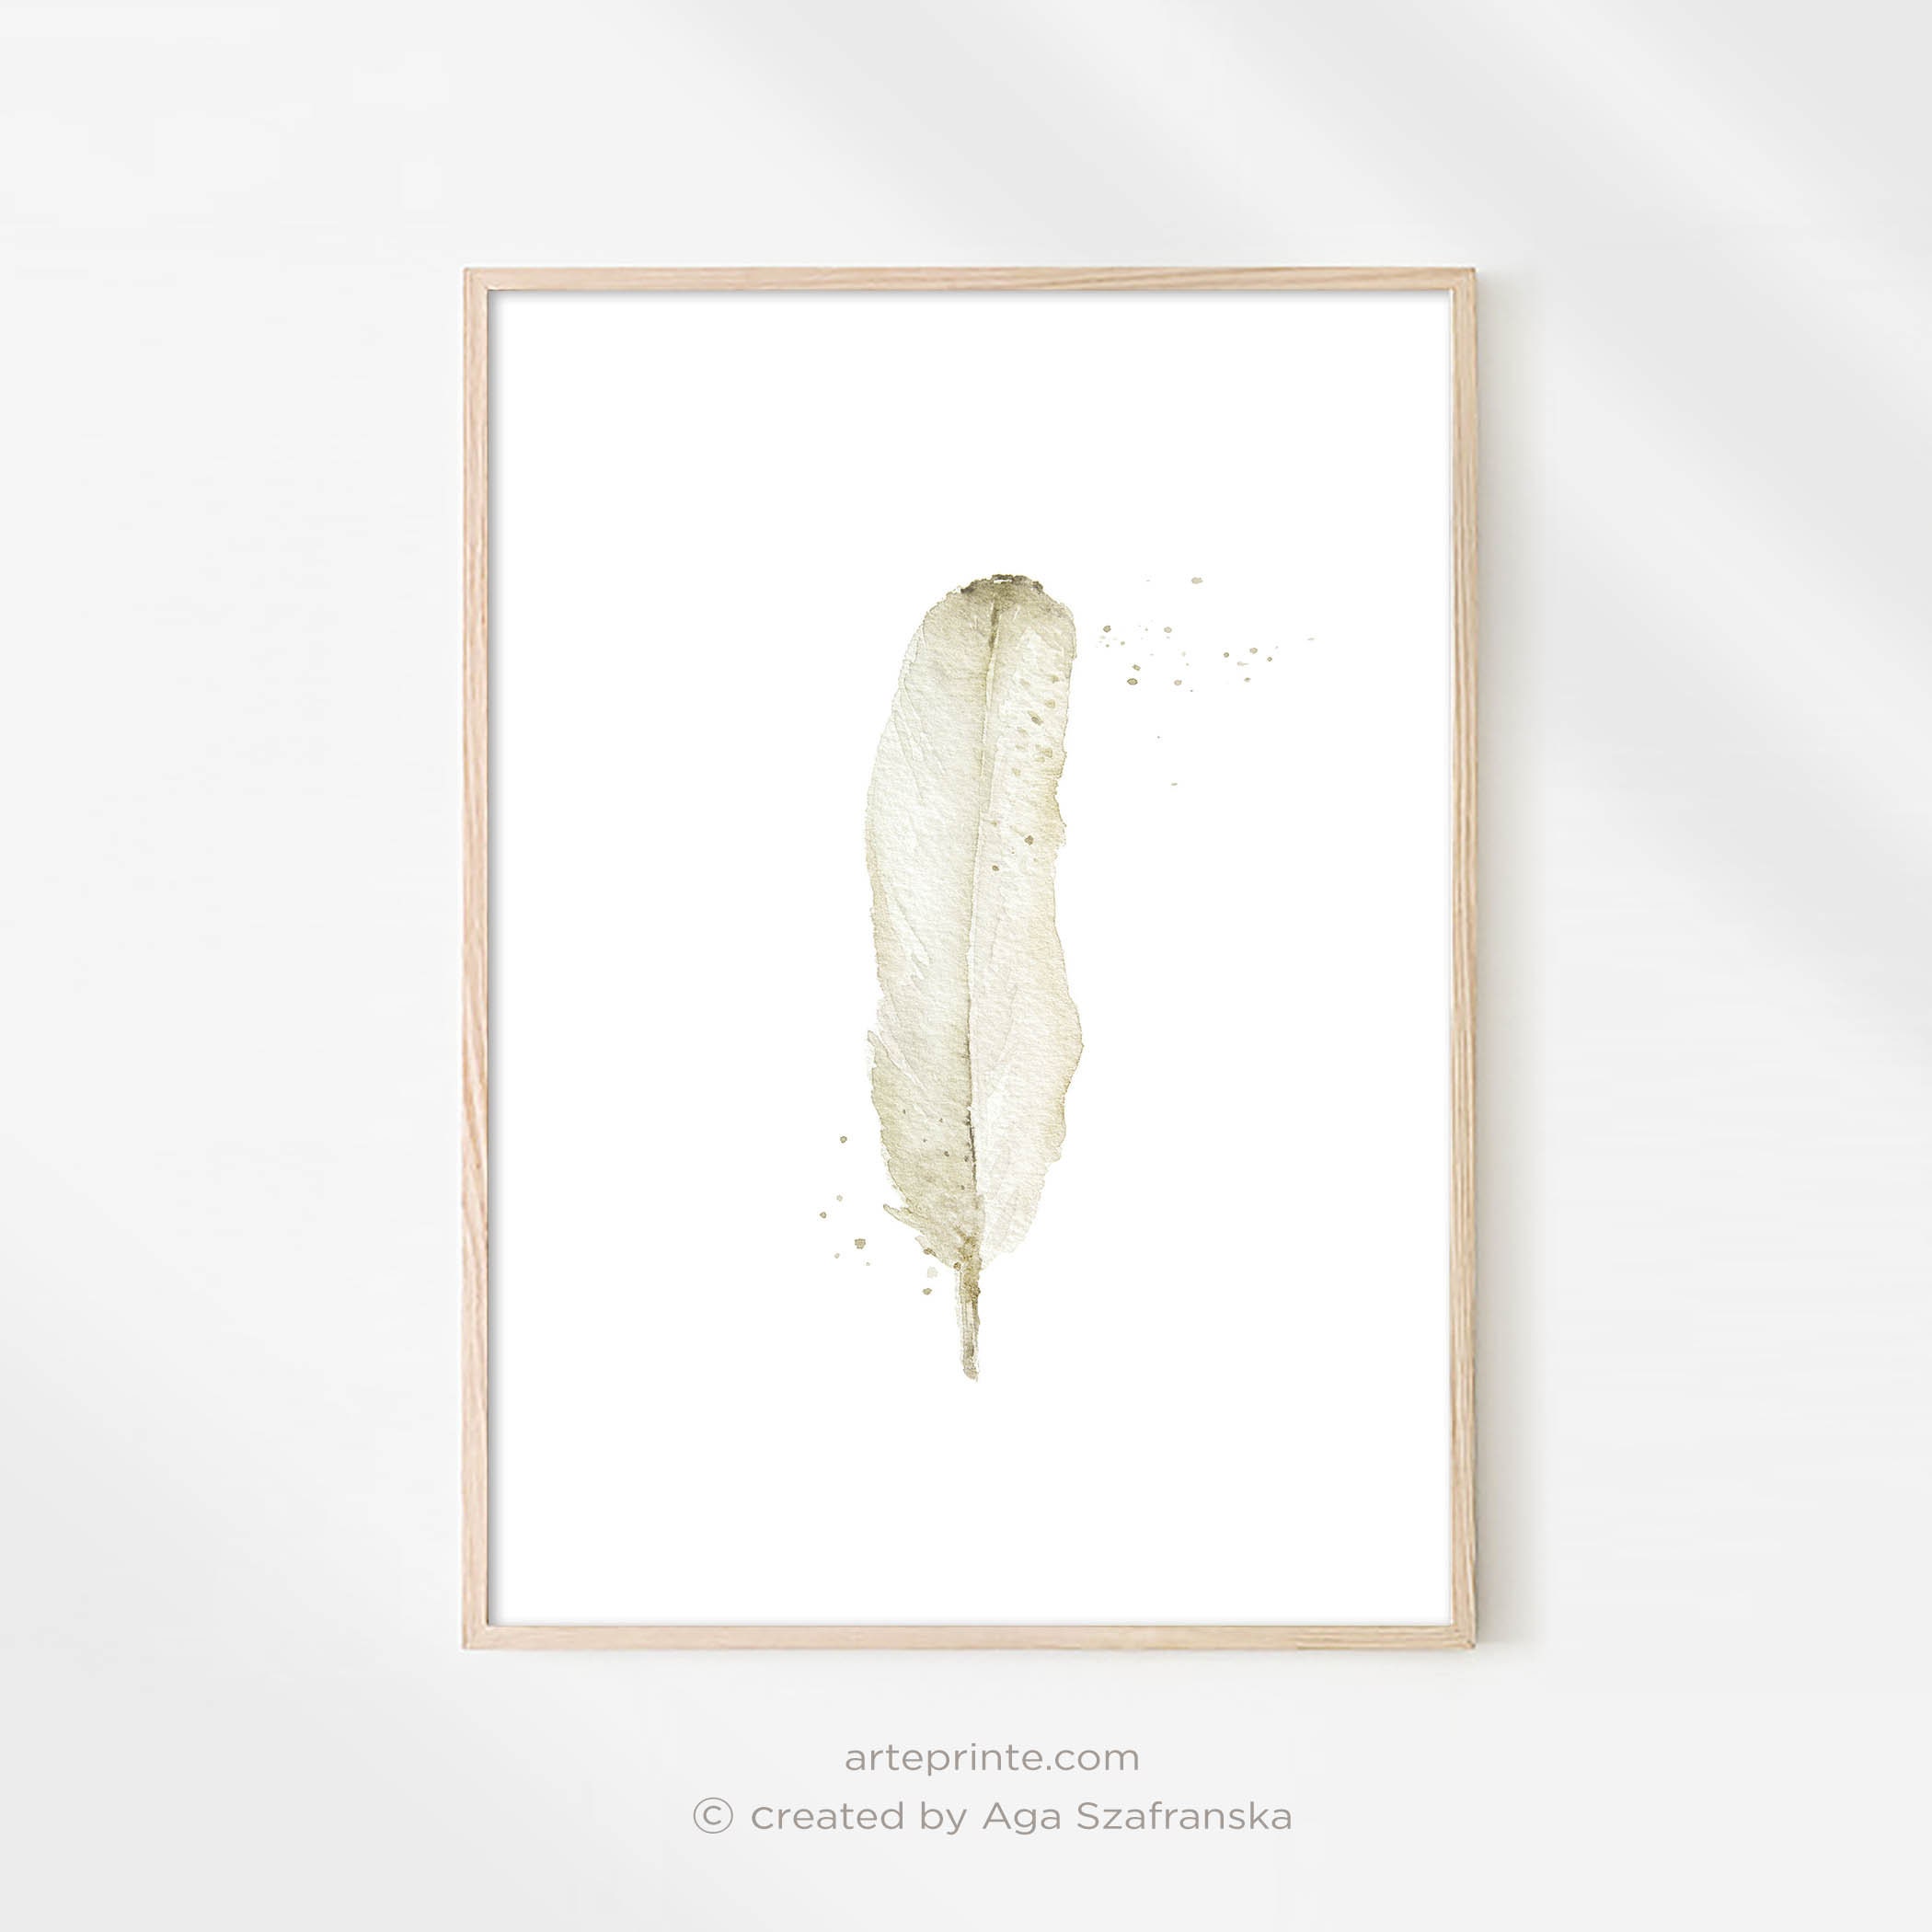 Vintage Feather Print Giclee Prints Home Decor Printed Poster Feather Poster Beige Sepia Gray Green Feather Wall Art Boho Wall Decor